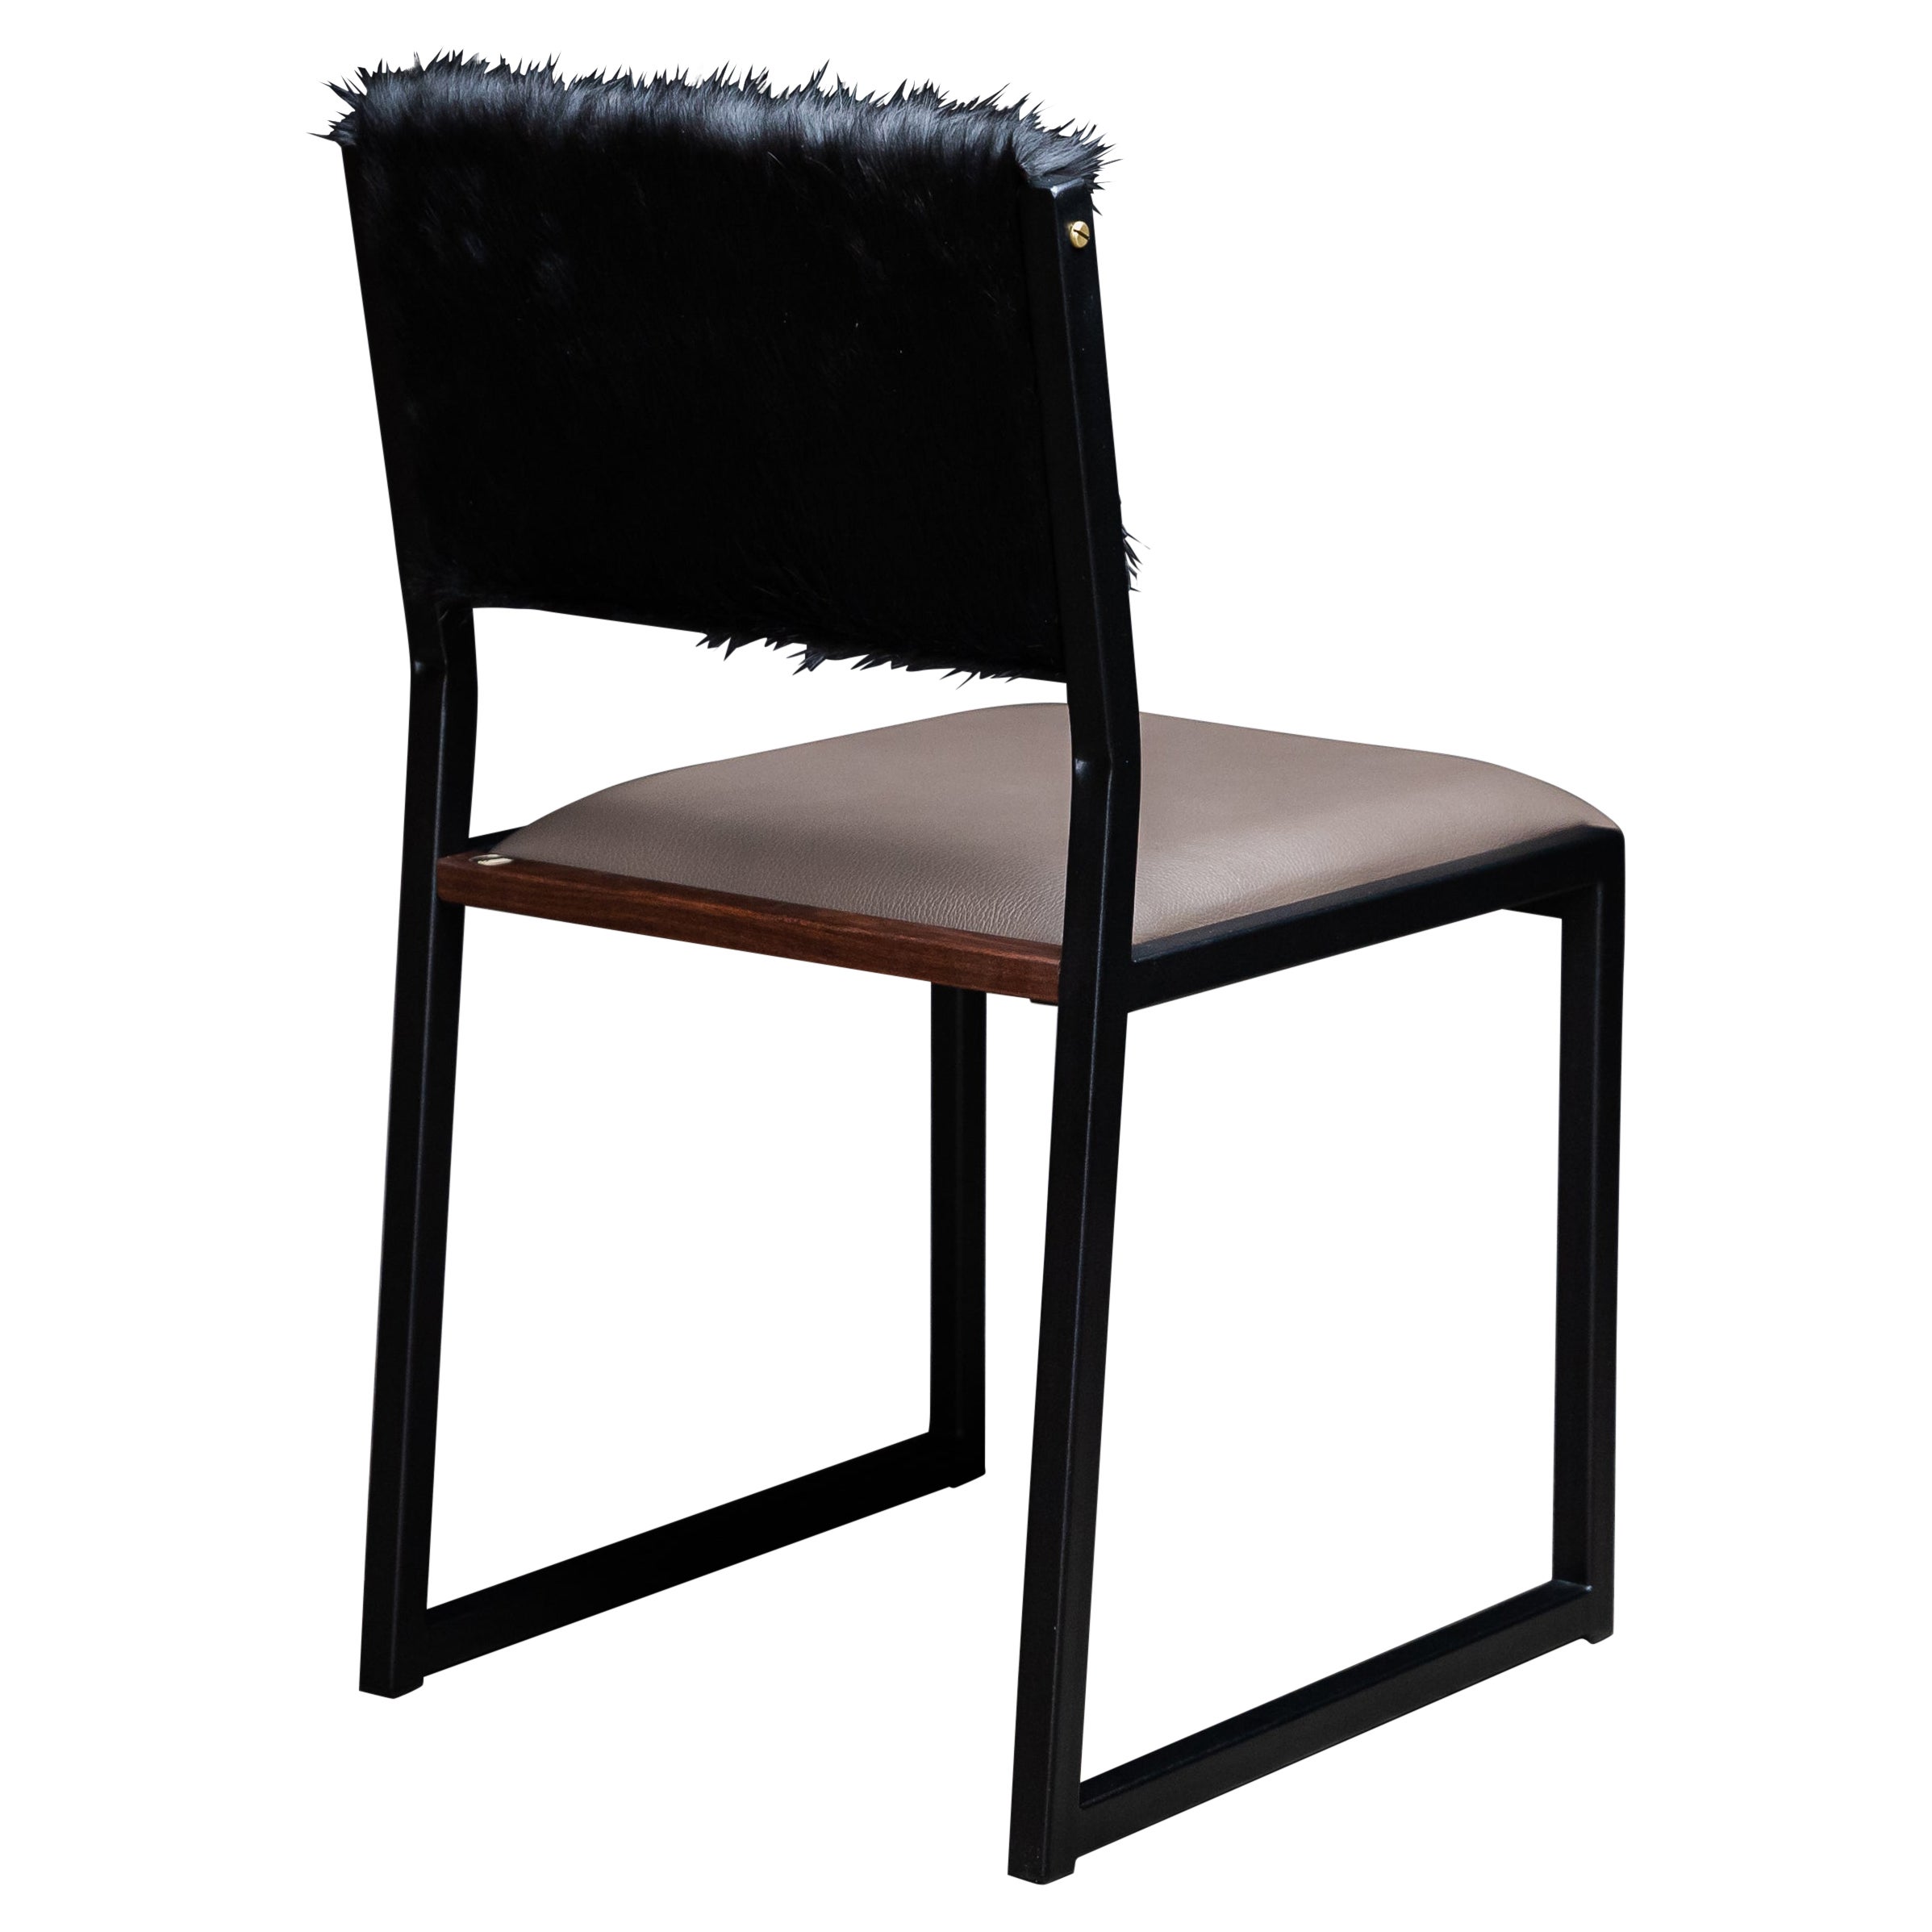 Shaker Modern Chair by Ambrozia, Walnut, Smokey Leather, Black Cowhide For Sale